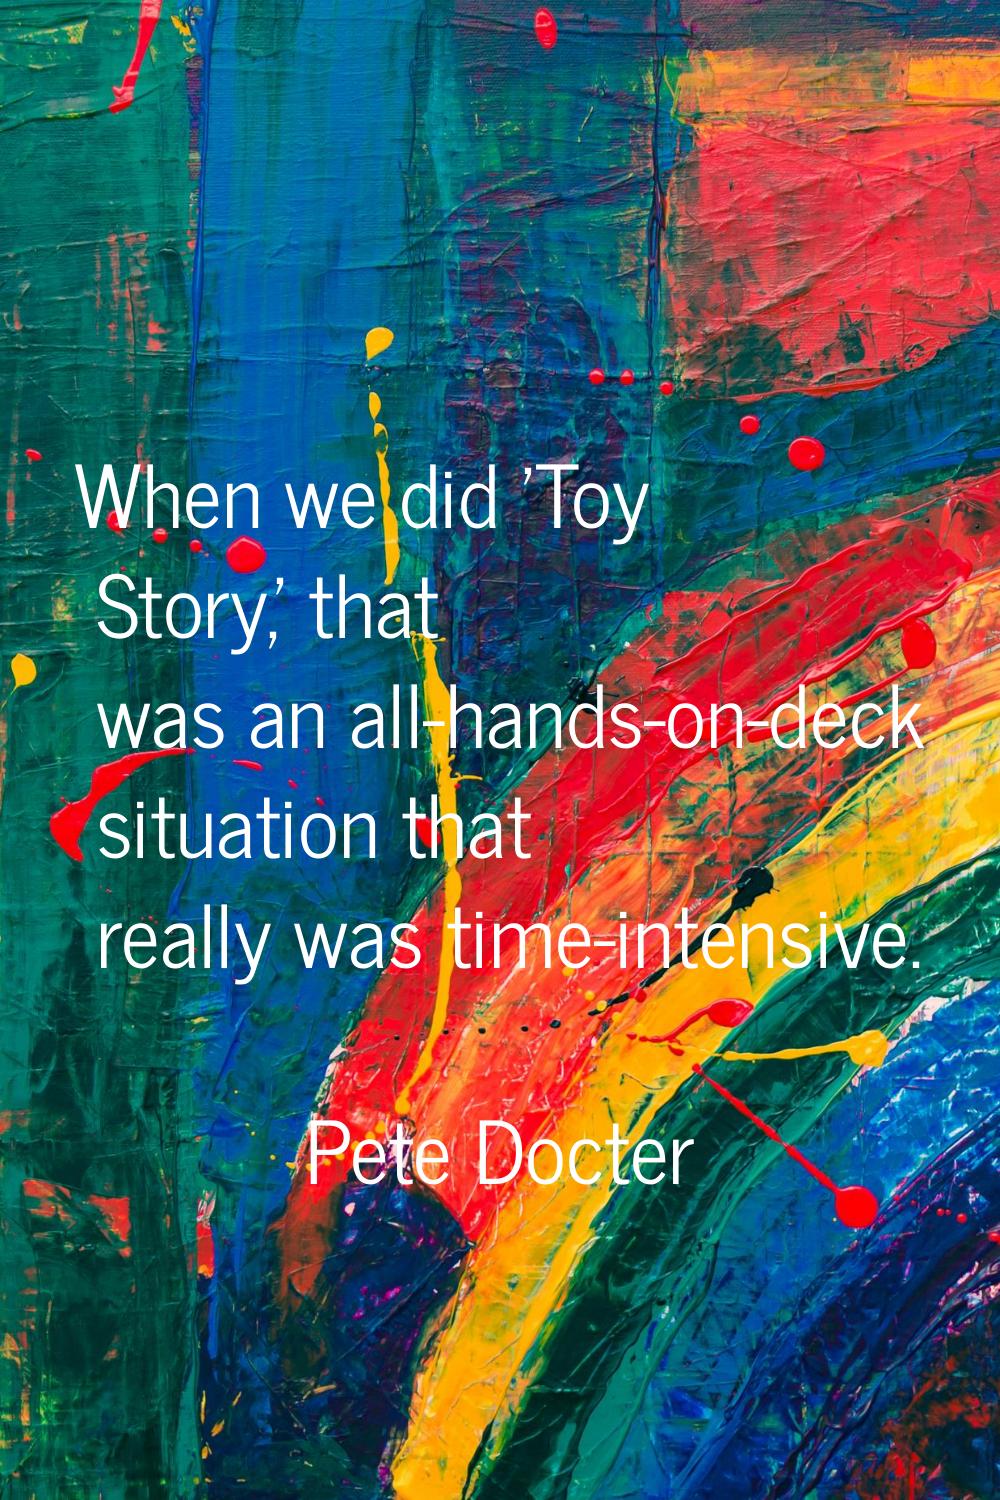 When we did 'Toy Story,' that was an all-hands-on-deck situation that really was time-intensive.